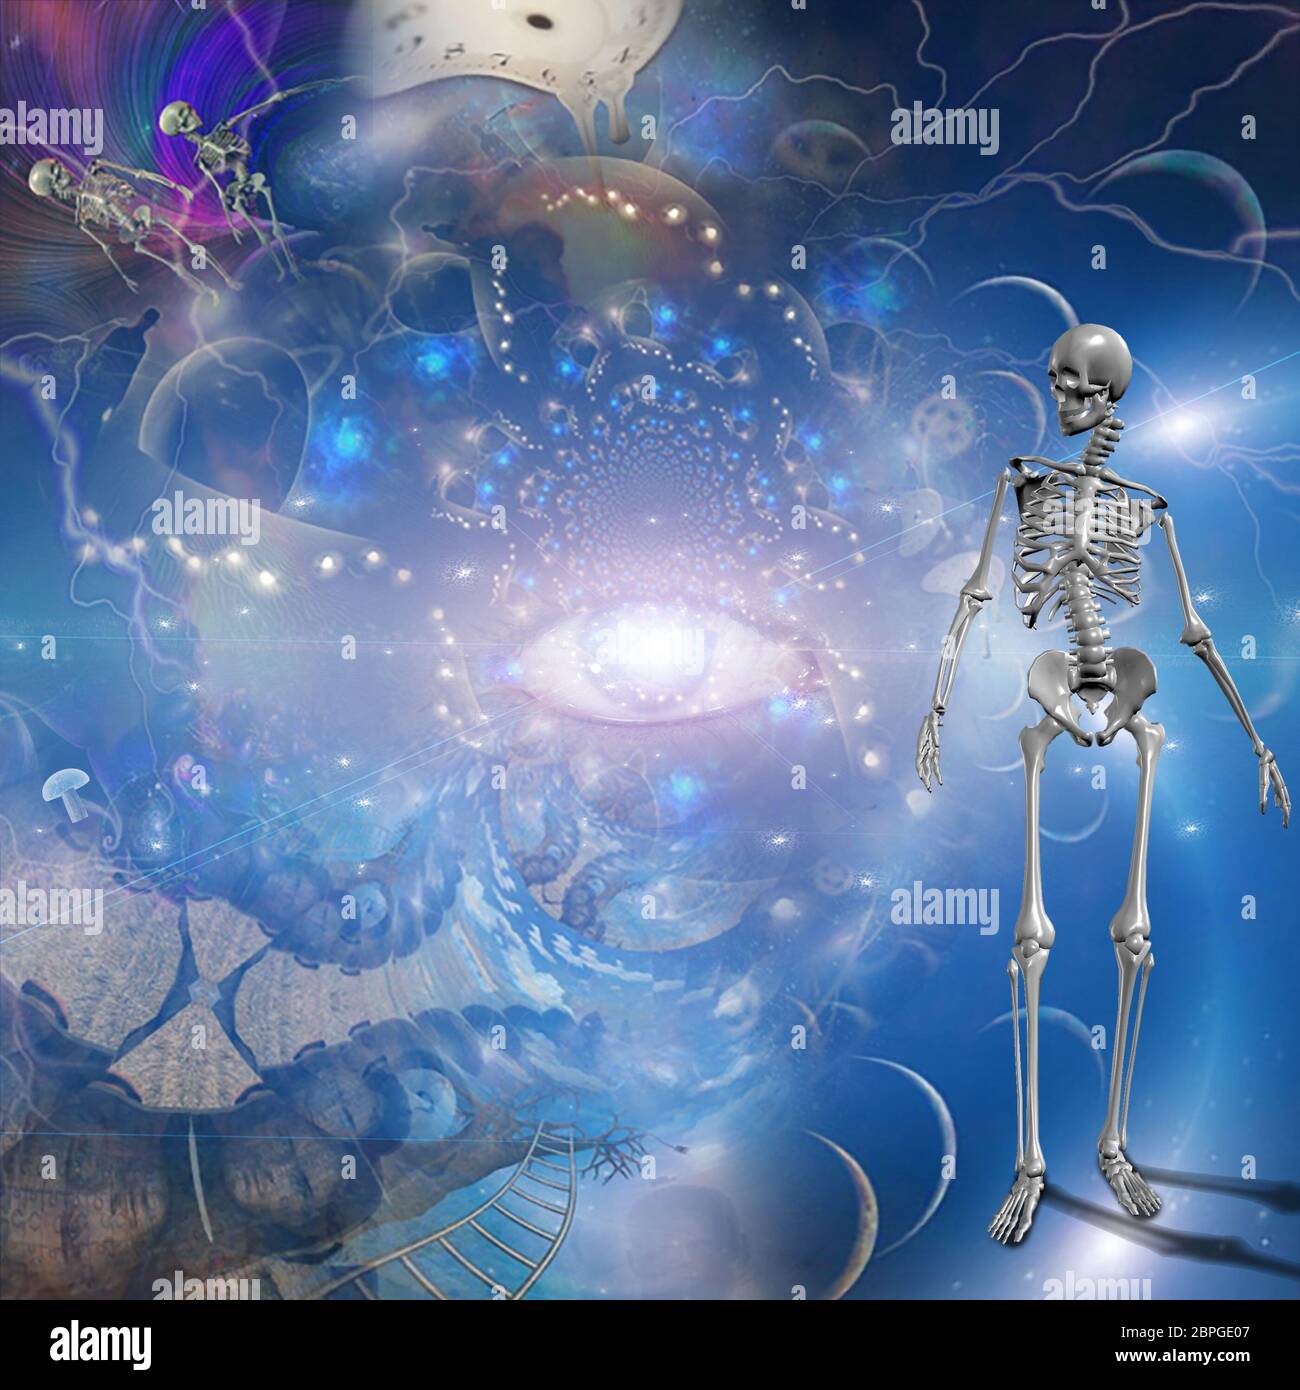 Surreal composition. Melting clocks and eye of God. Skeletons in endless dimensions Stock Photo